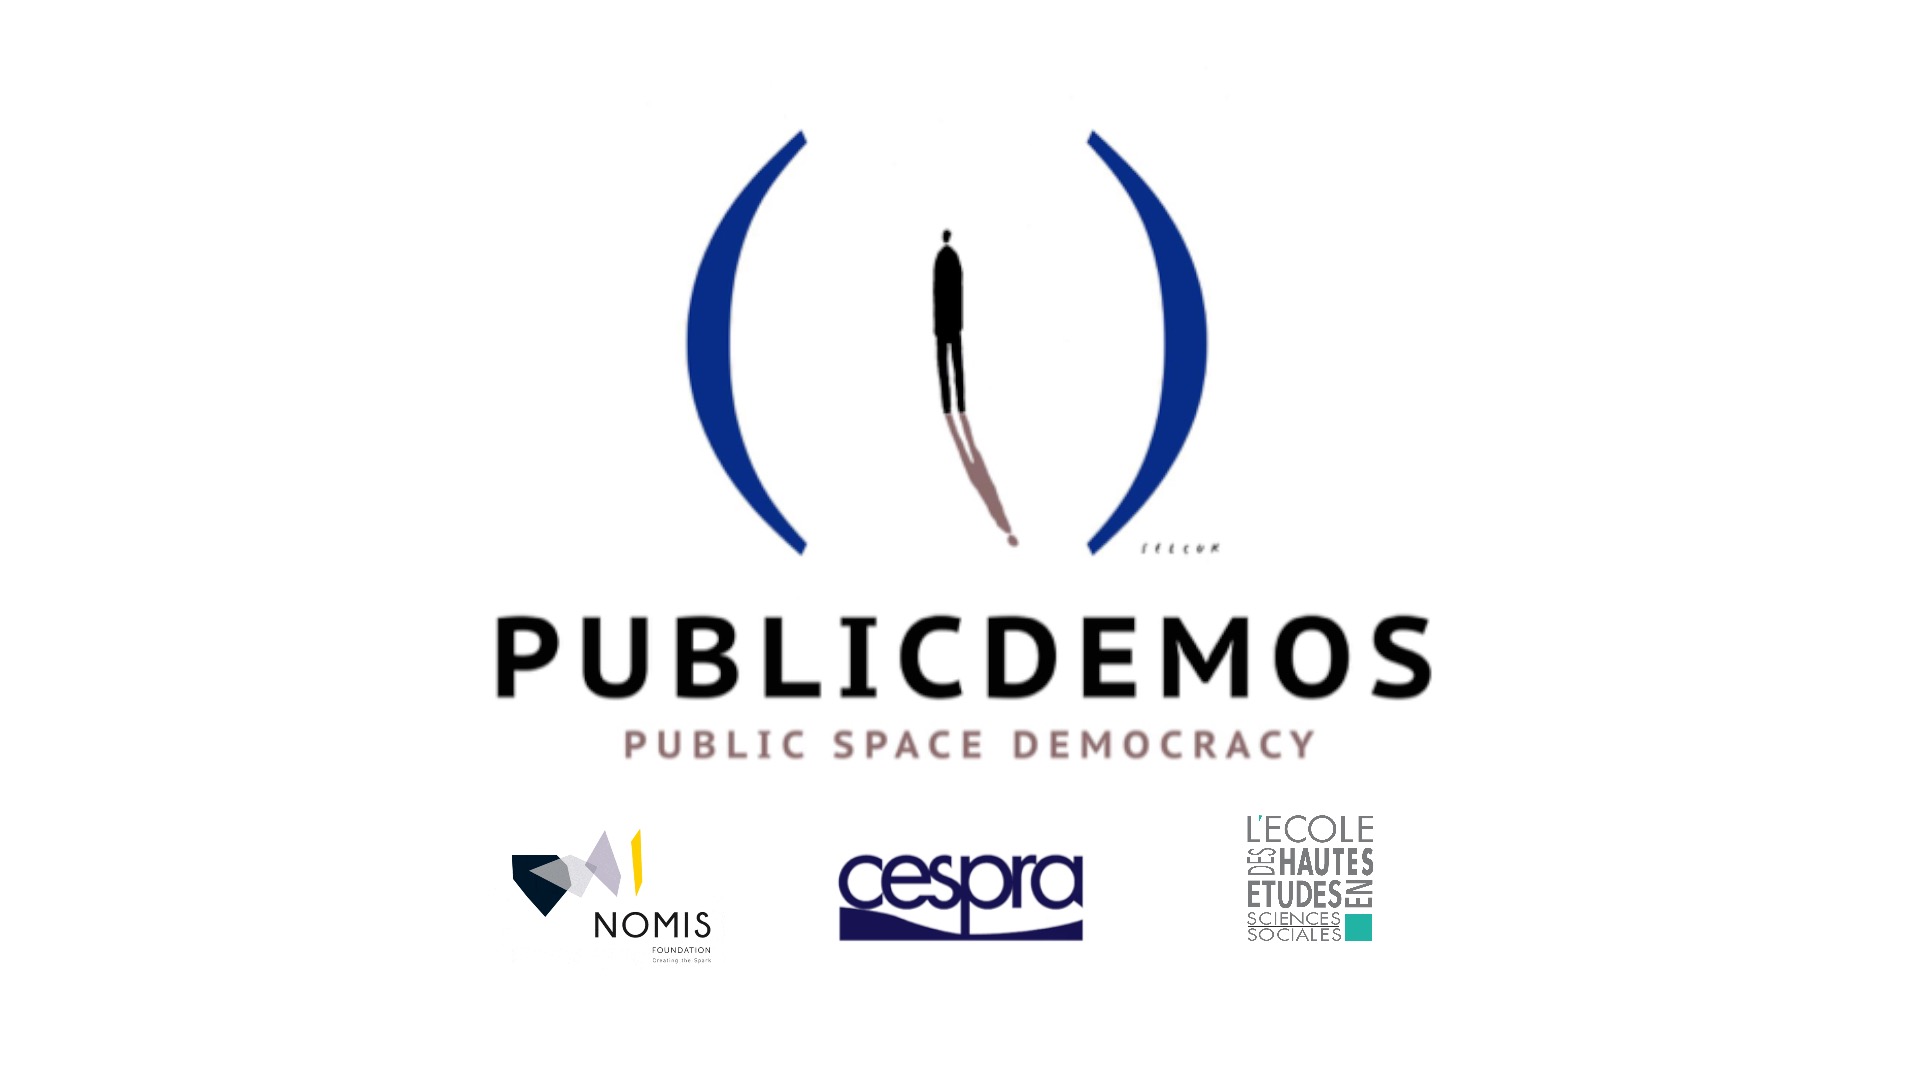 1 - PublicDemoS New Forms of Public Agency